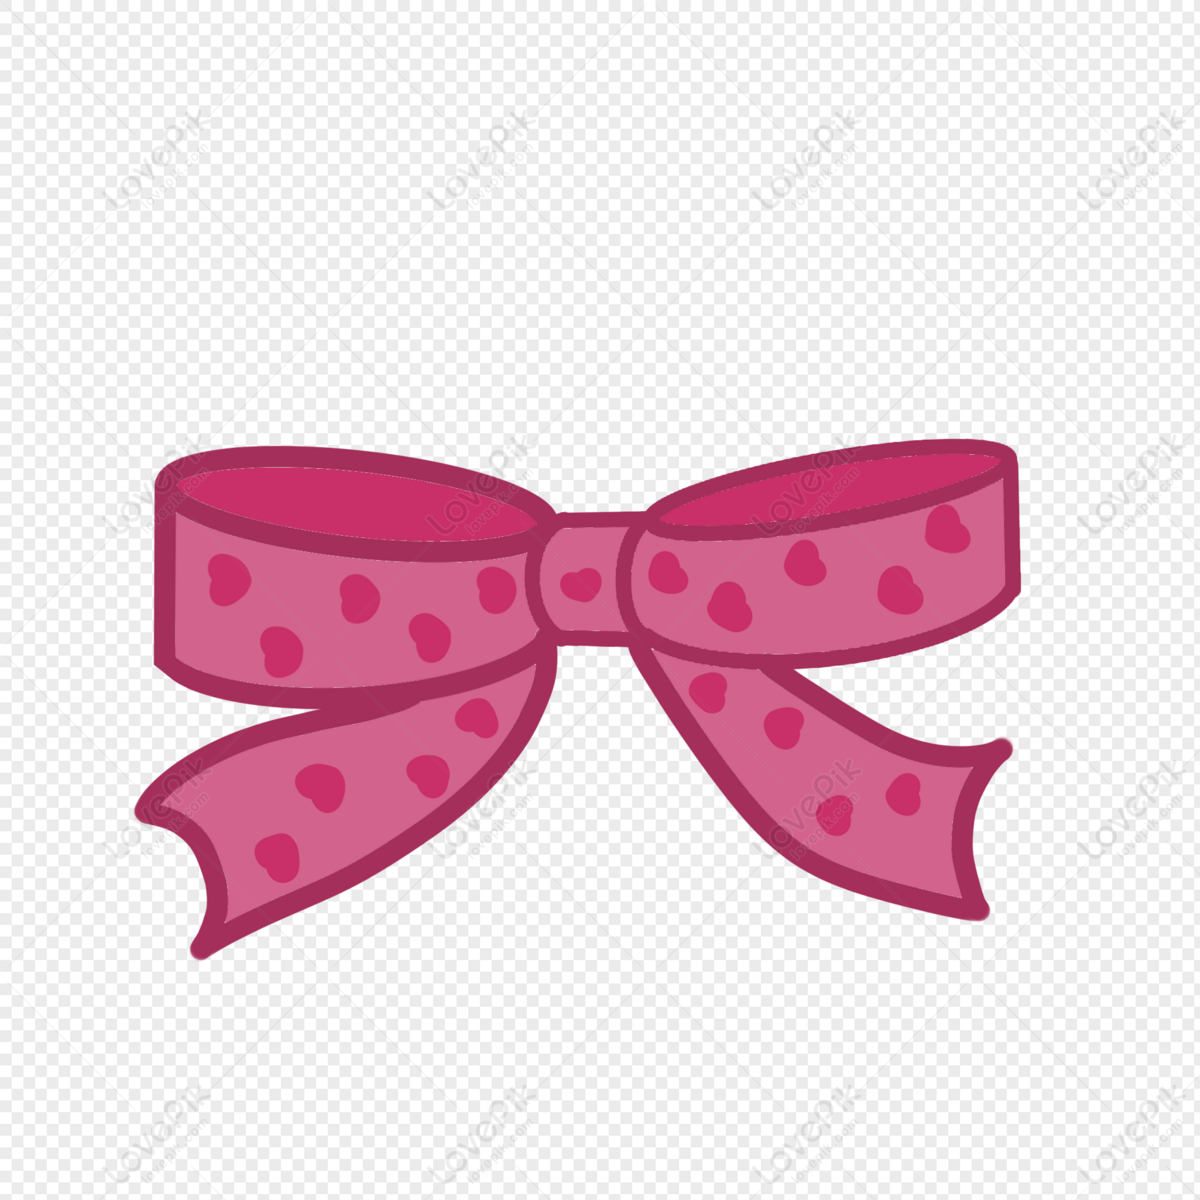 Red bow with roses attached on black background png download